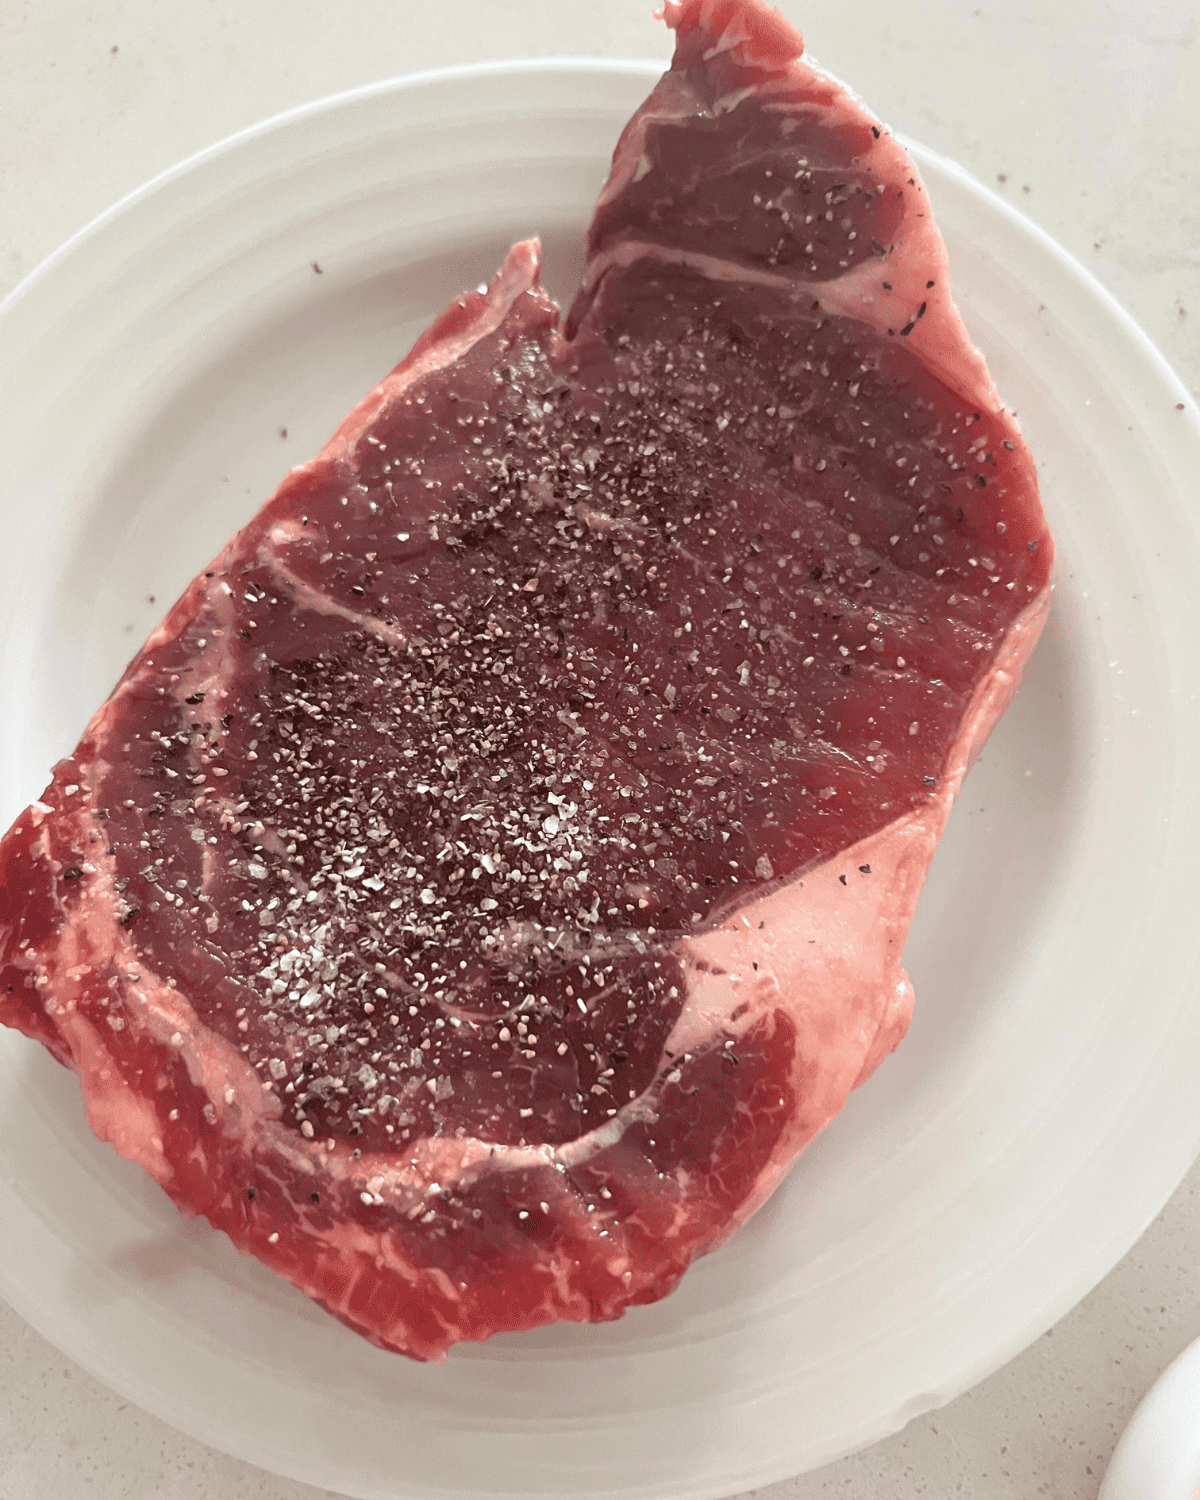 seasoned steak with salt and pepper on a white plate.